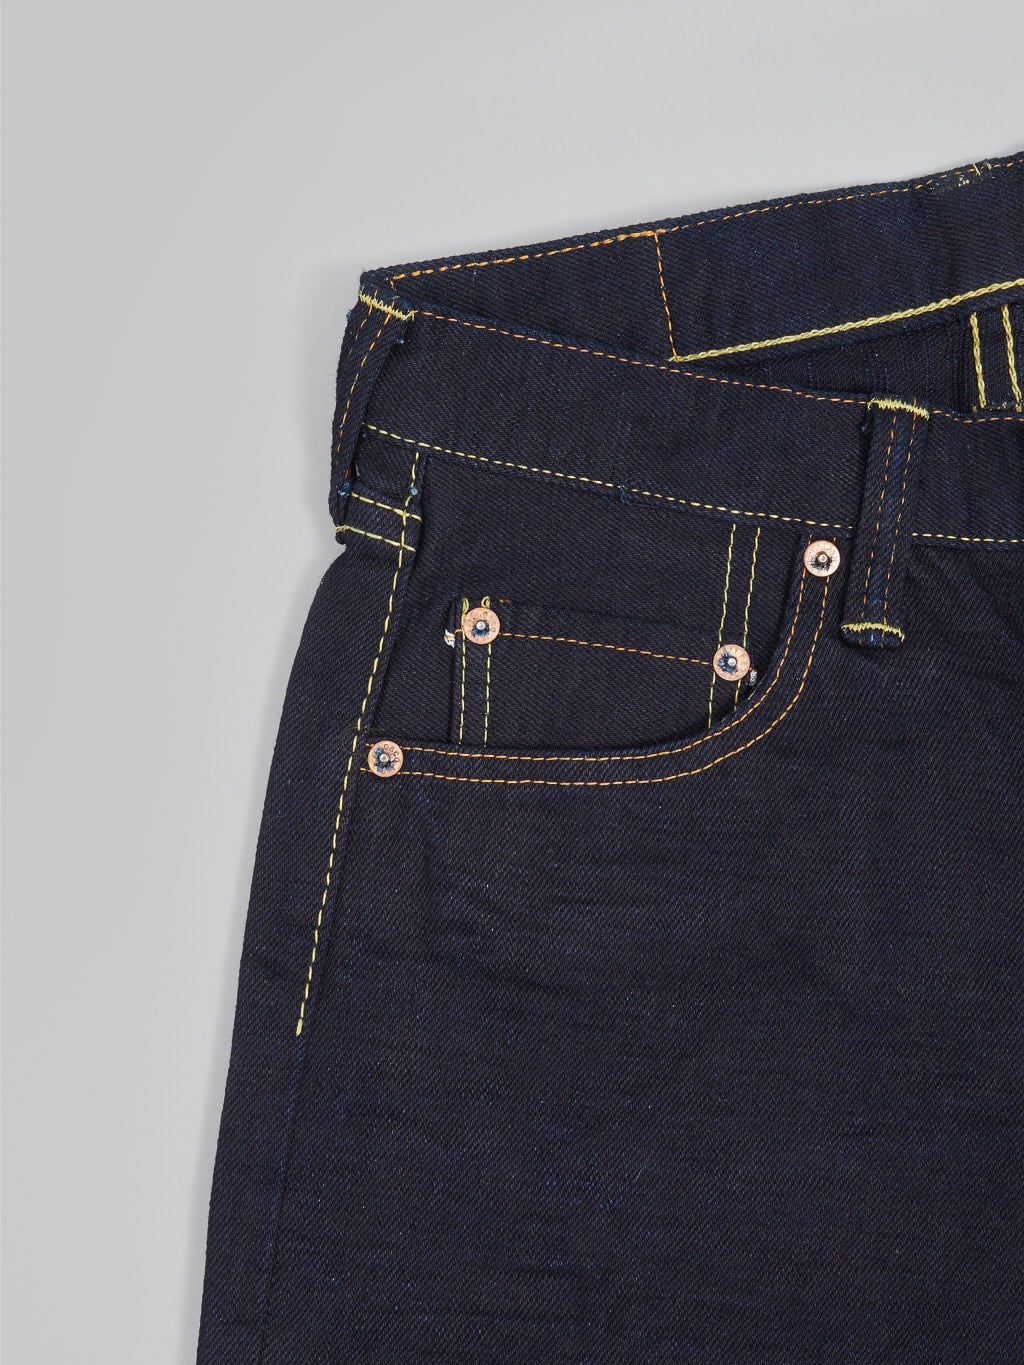 The Strike Gold 5004ID double indigo selvedge jeans coin pocket